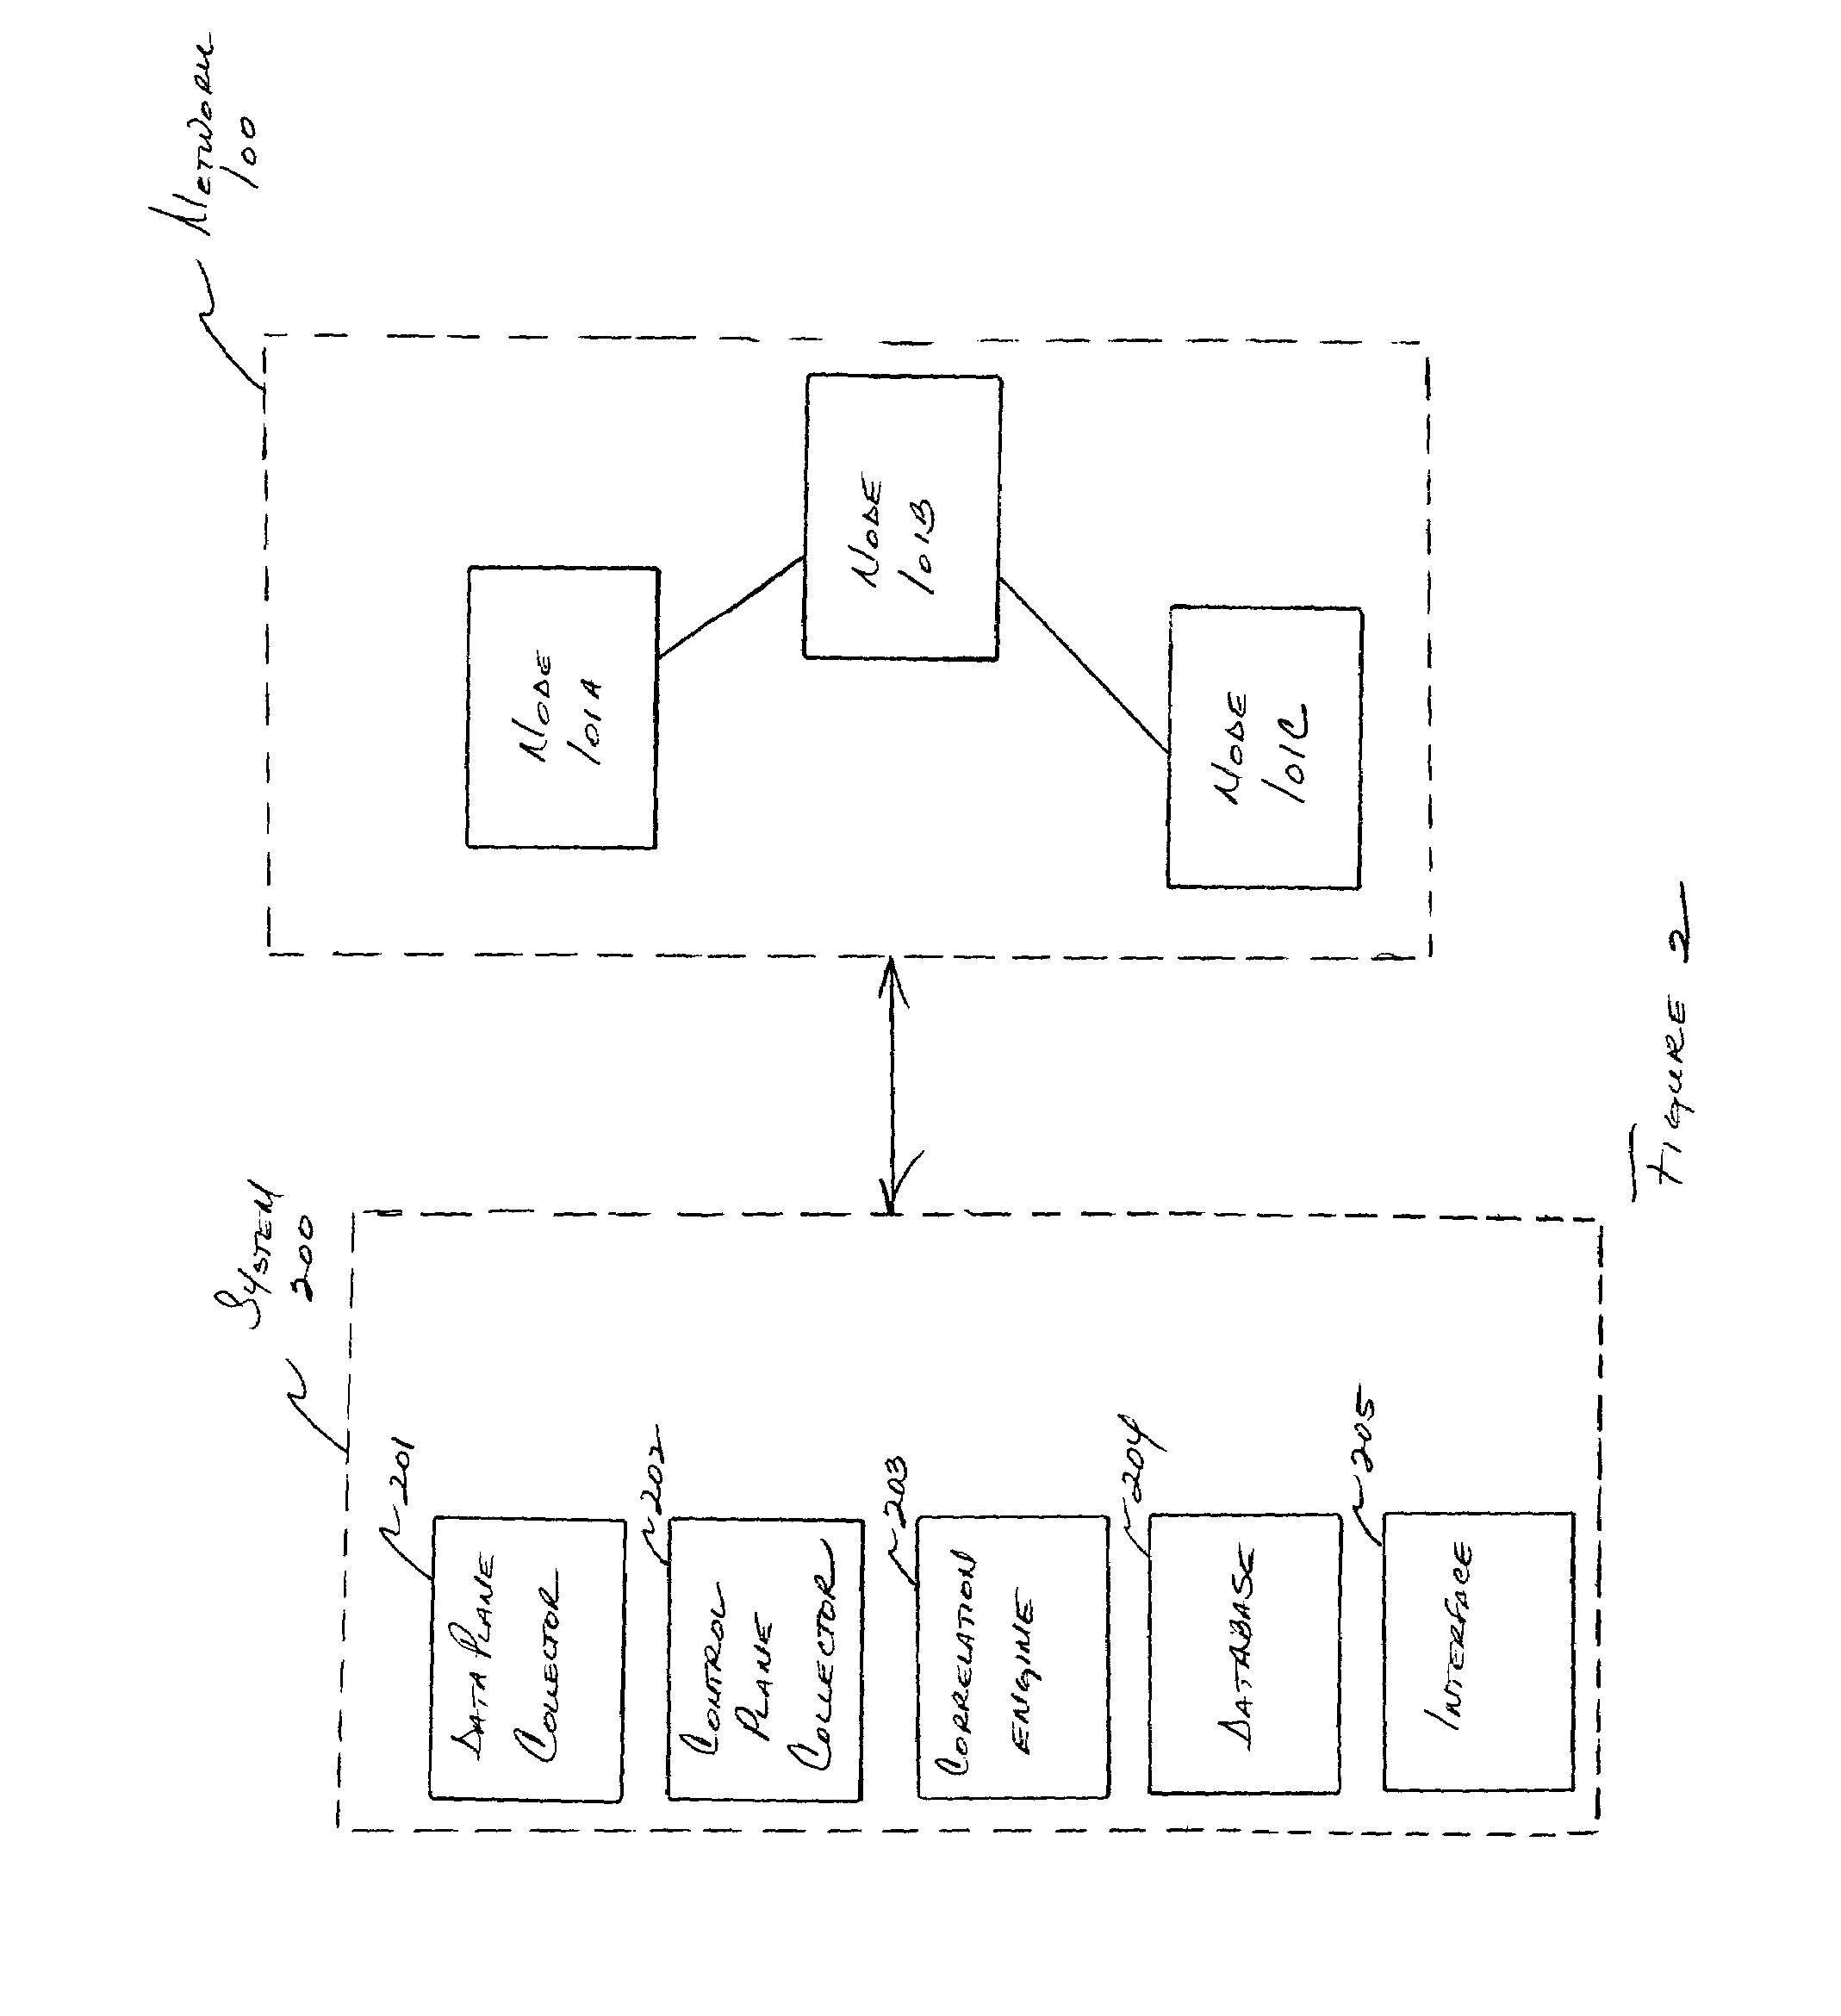 System and method for correlating traffic and routing information